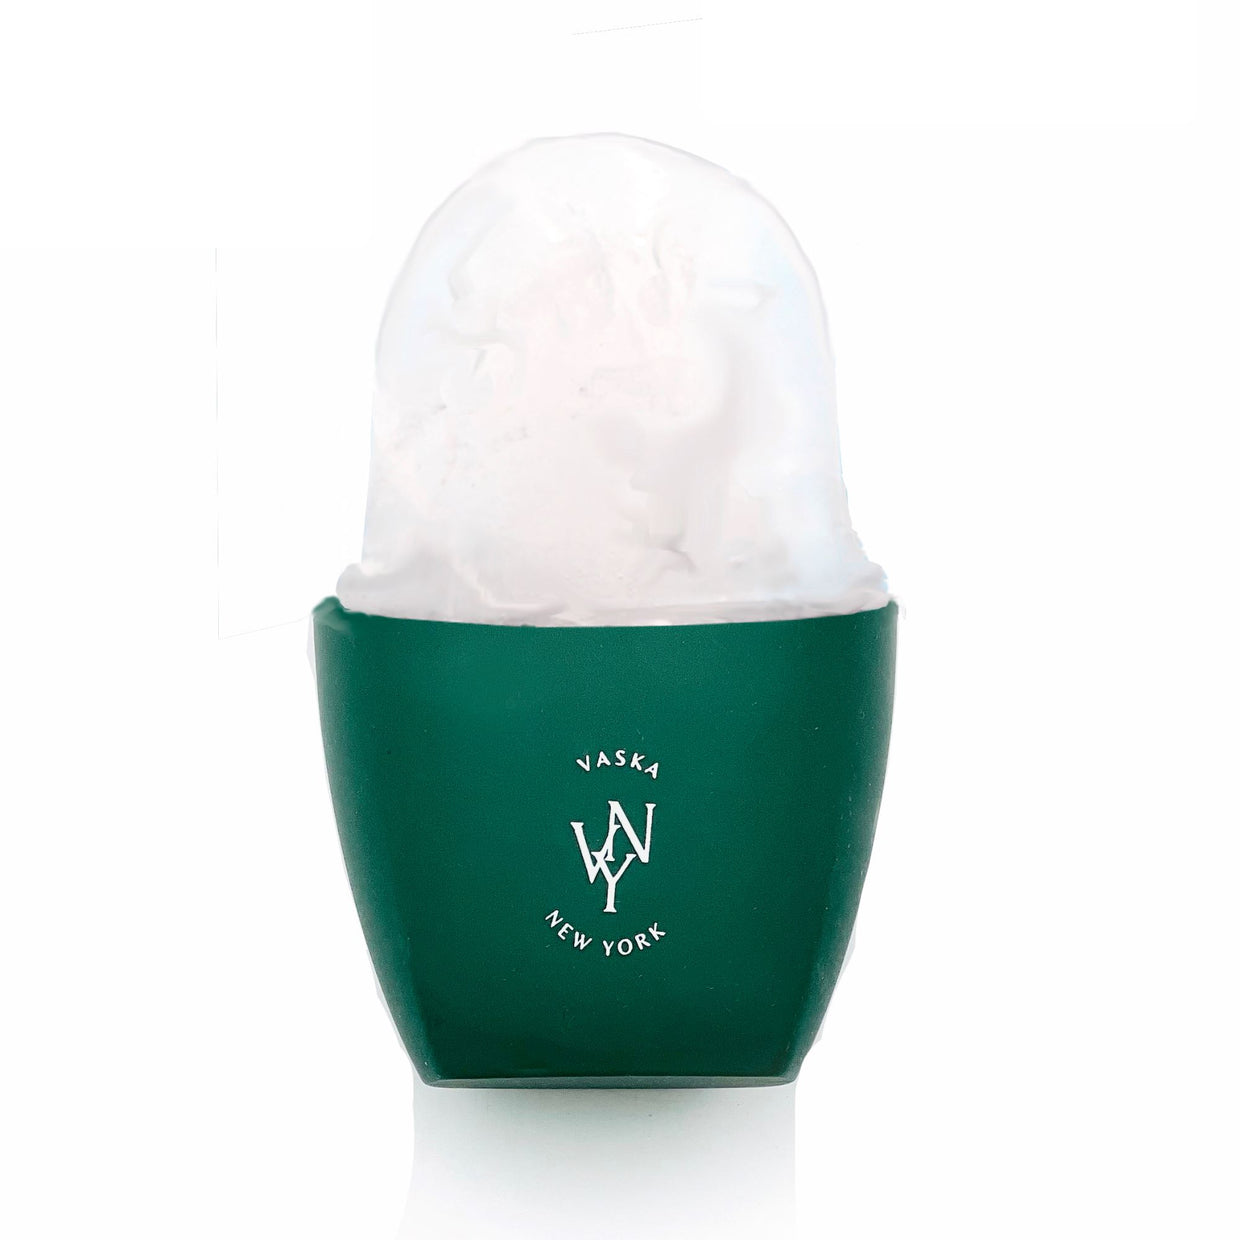 Solaris Laboratories NY Cryotherapy Face Massager by Vaska Skin Solaris Laboratories NY Shop at Exclusive Beauty Club